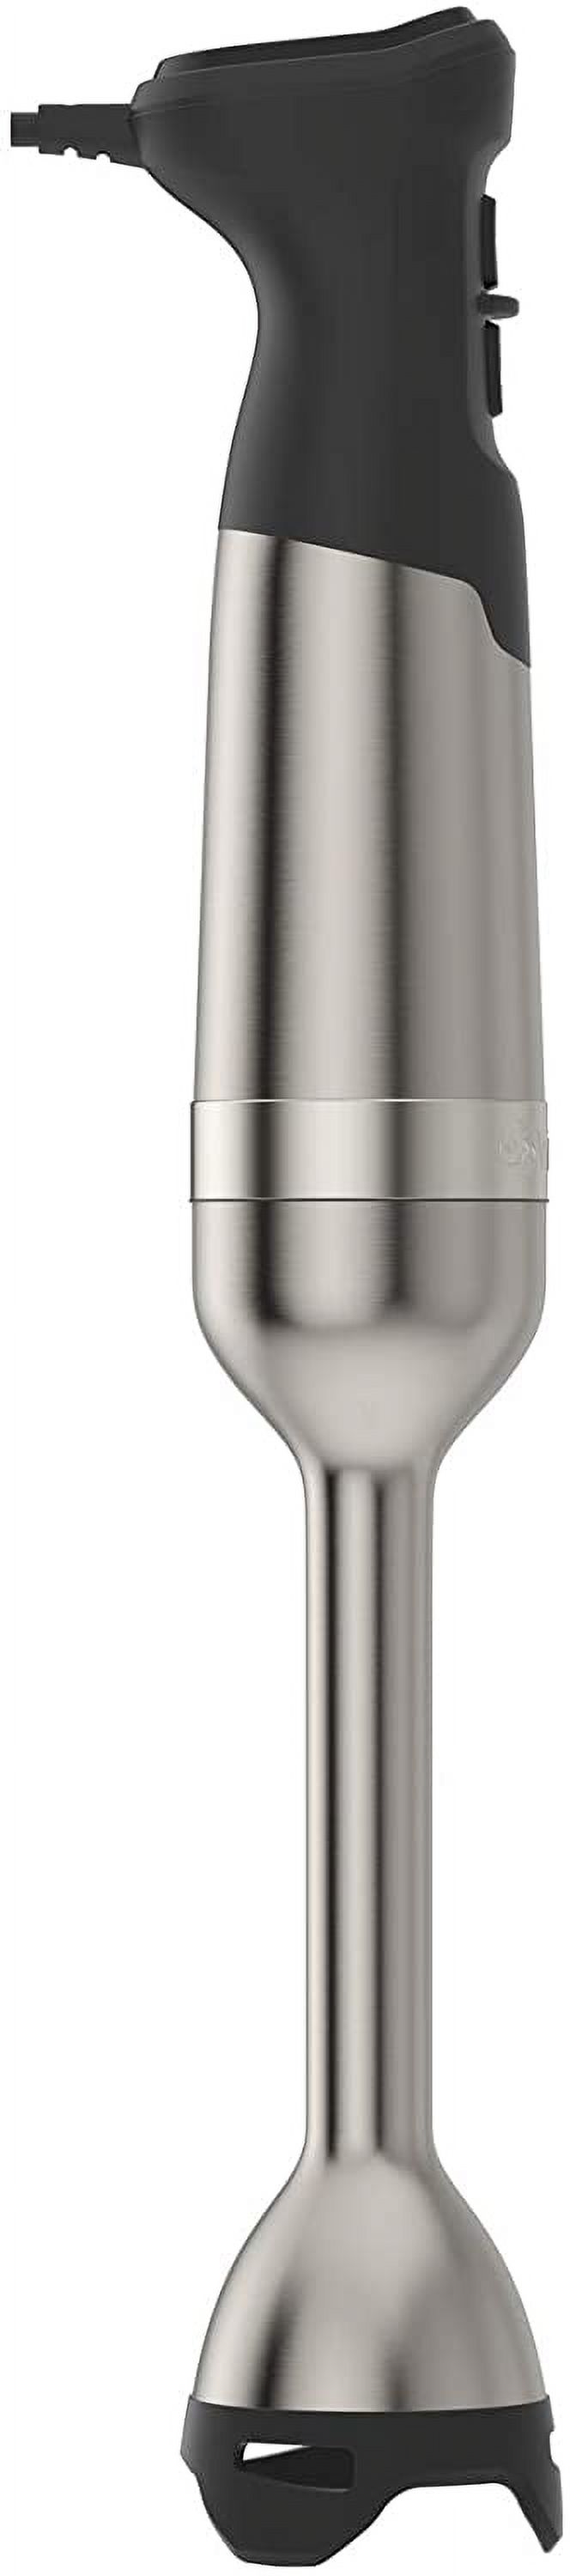 durable Vitamix Immersion Blender Stainless Steel 18 inches - Walmart.com